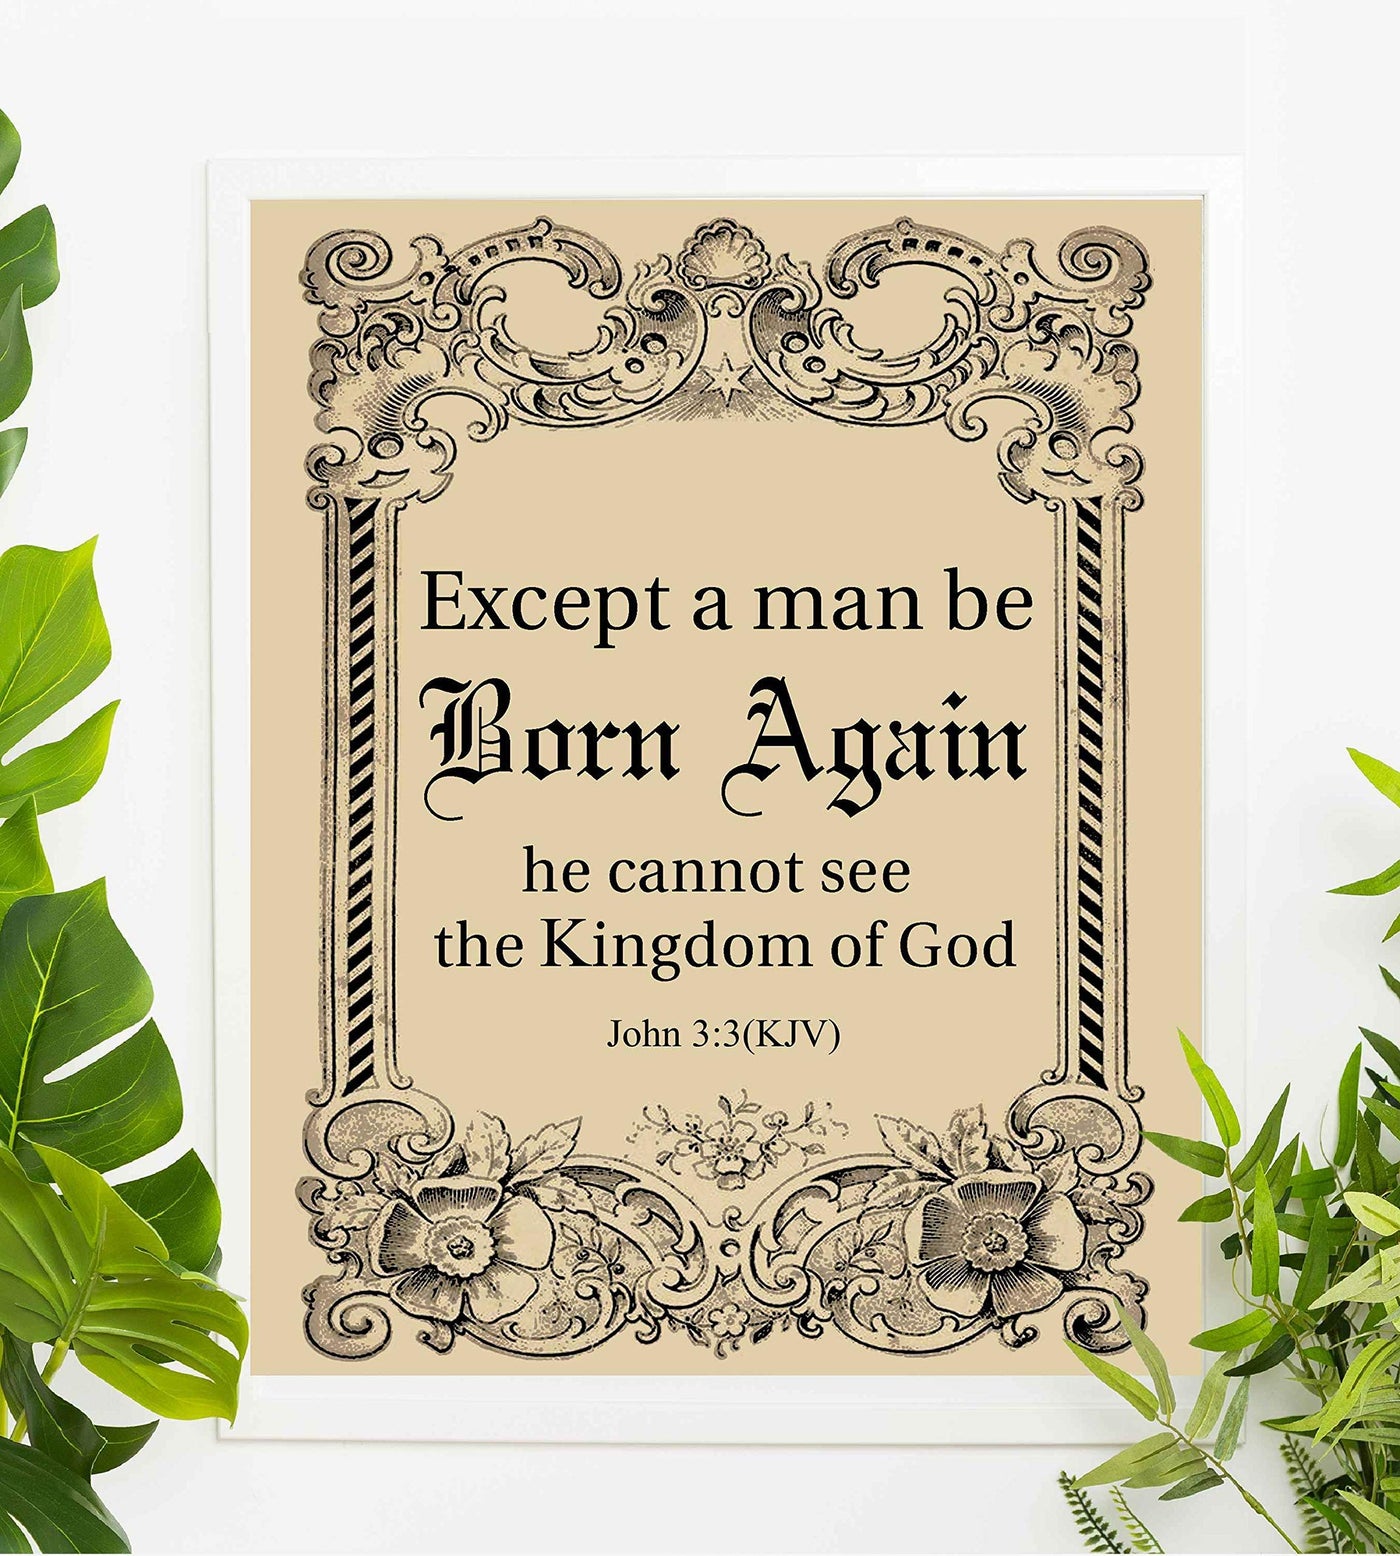 Kingdom of God-John 3:3-Bible Verse Wall Art Sign-8 x 10"-Scripture Wall Print-Ready to Frame. Religious Typographic w/Abstract Floral Border Design. Home-Office-Church D?cor. Great Christian Gift!